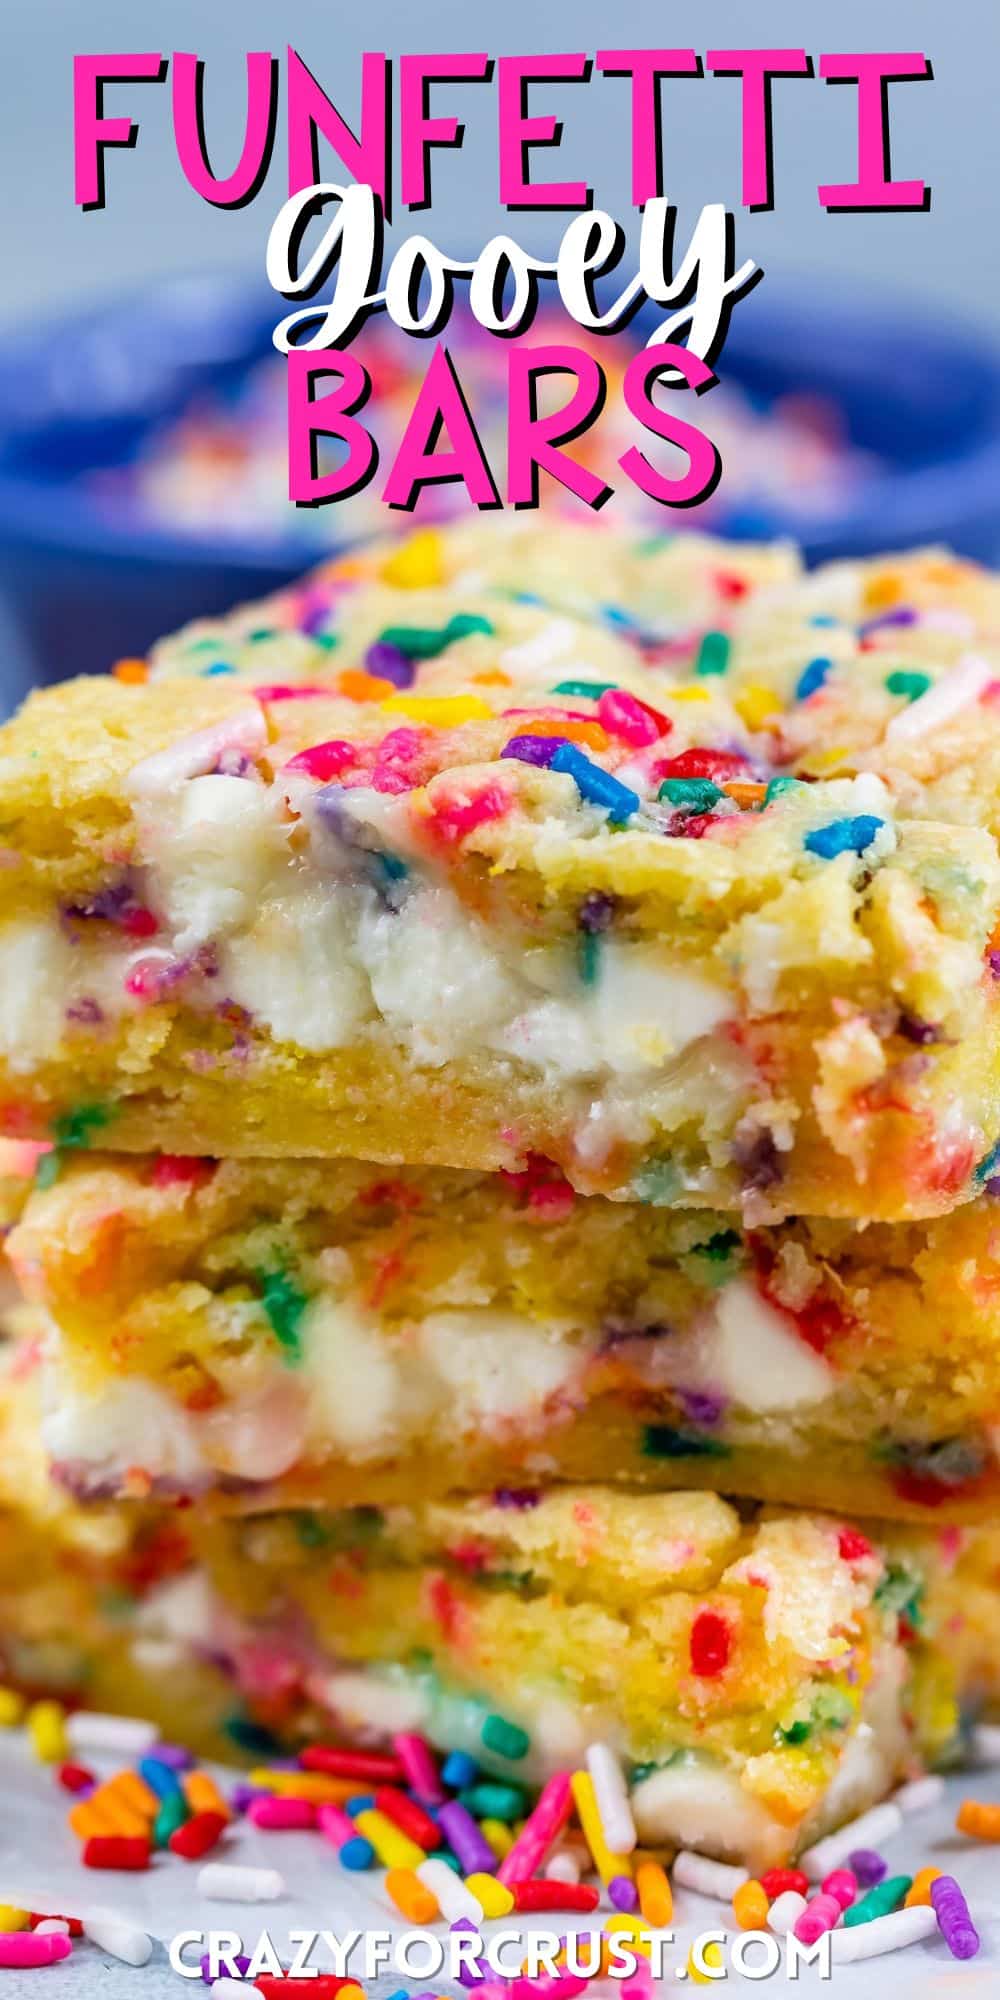 stacked funfetti bars with white chocolate chips and colorful sprinkles baked in with words on the image.